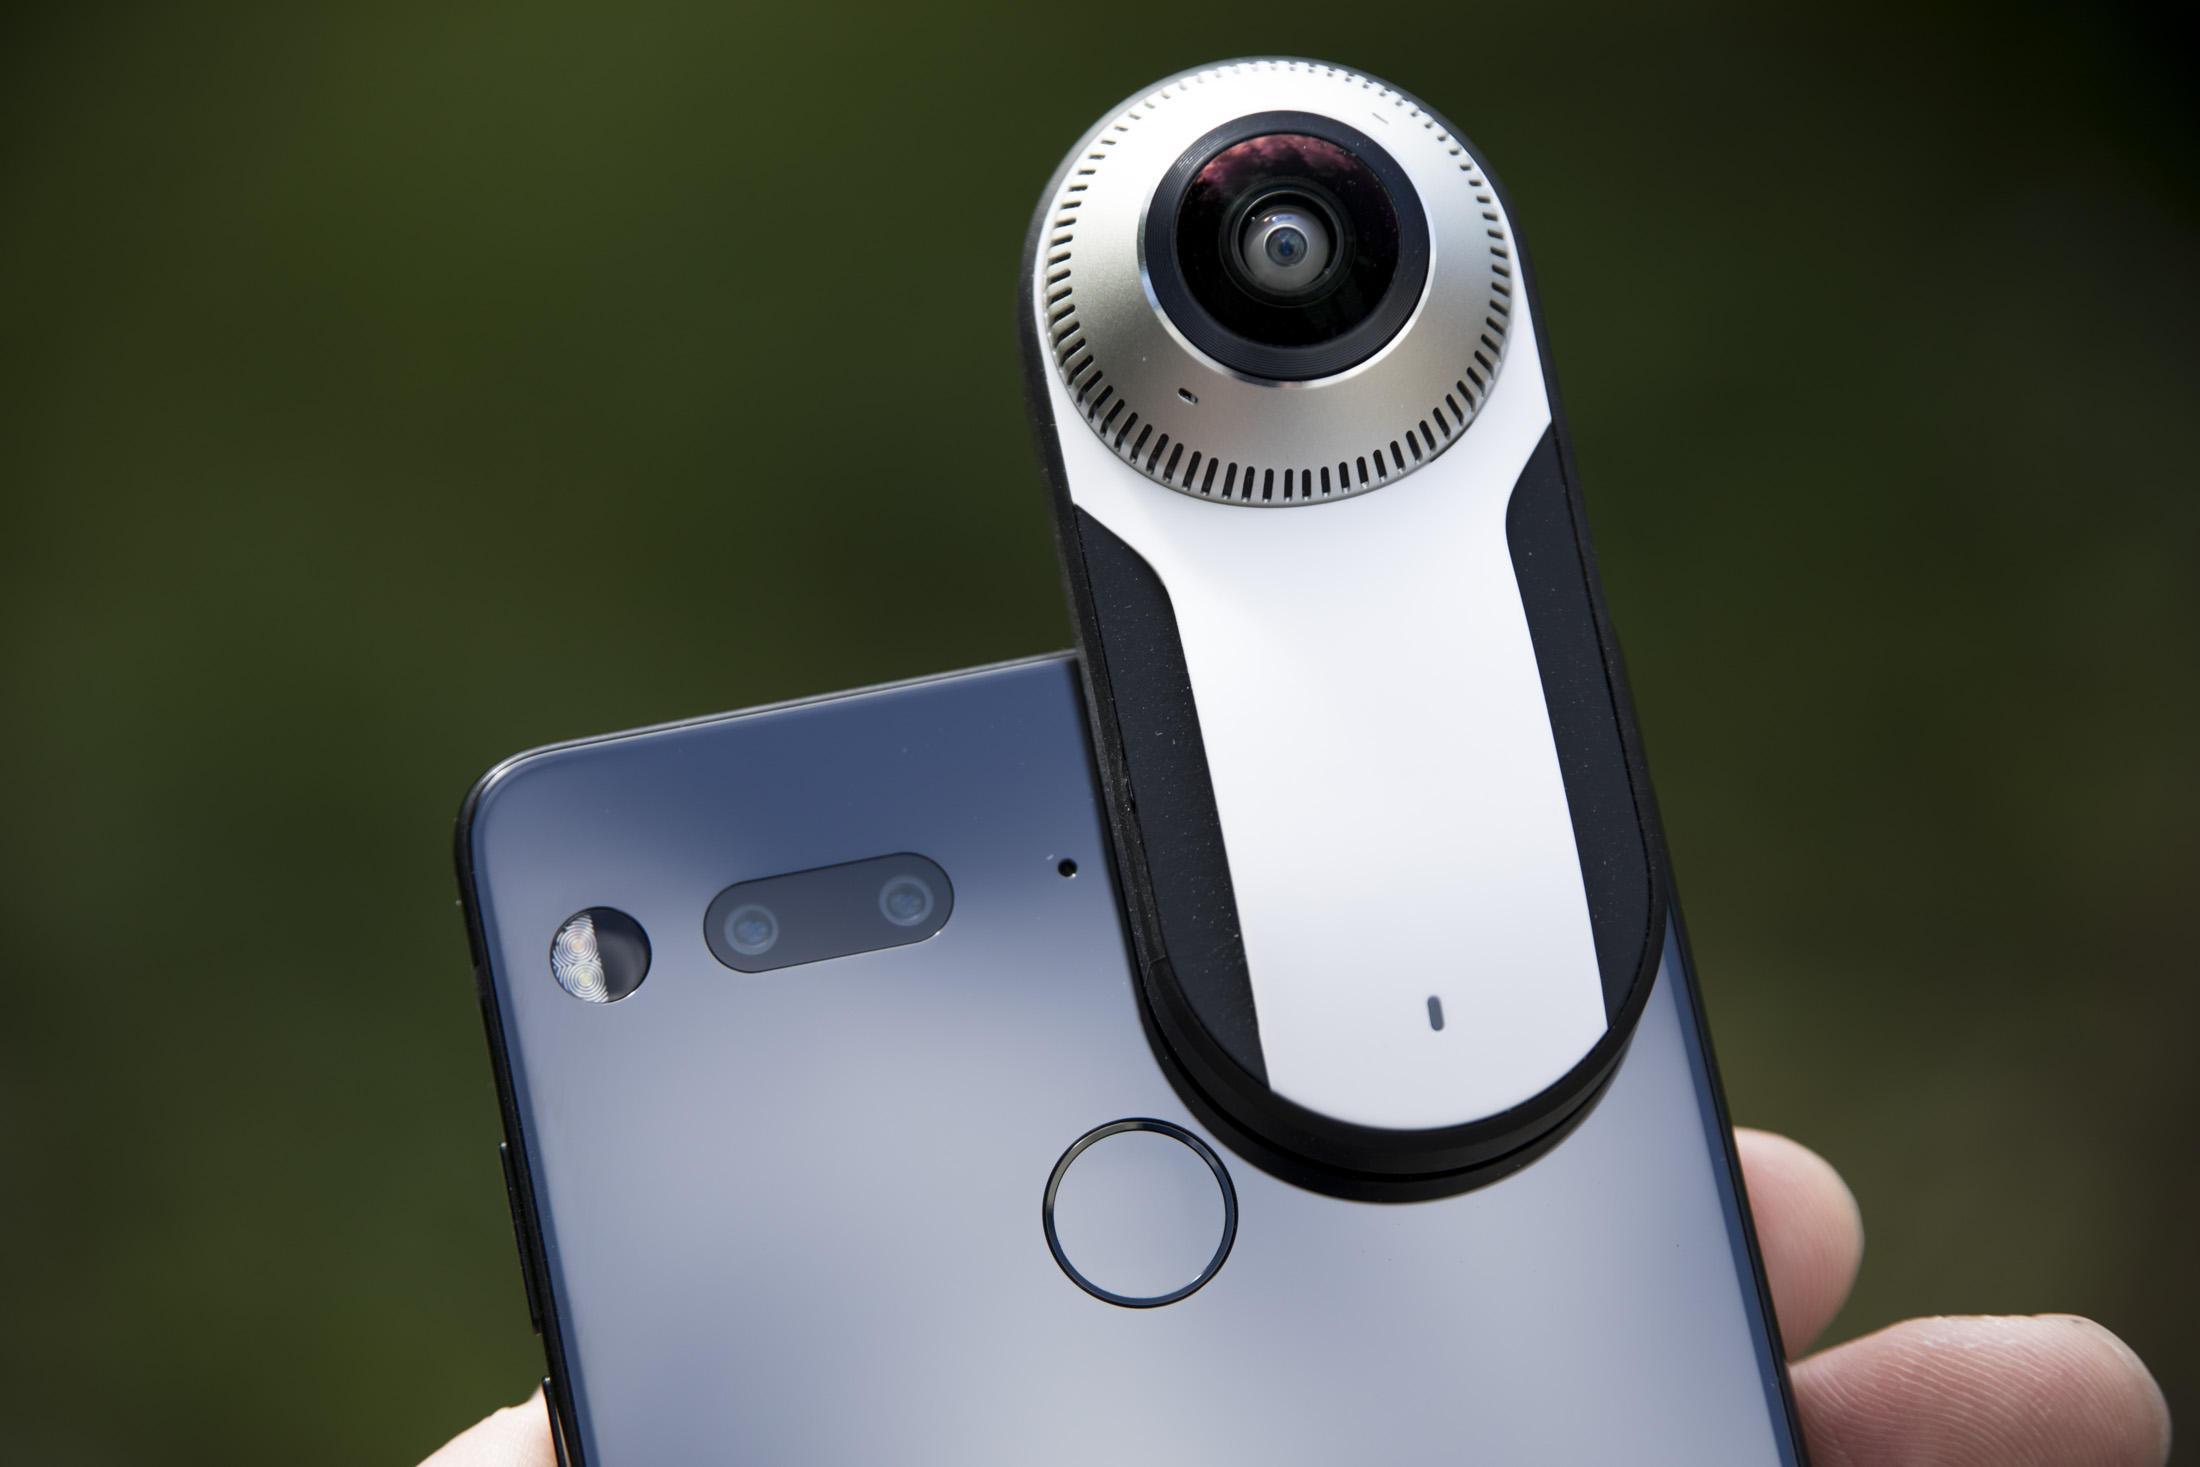 Essential Phone can now stream live to Facebook from the 360 camera add-on